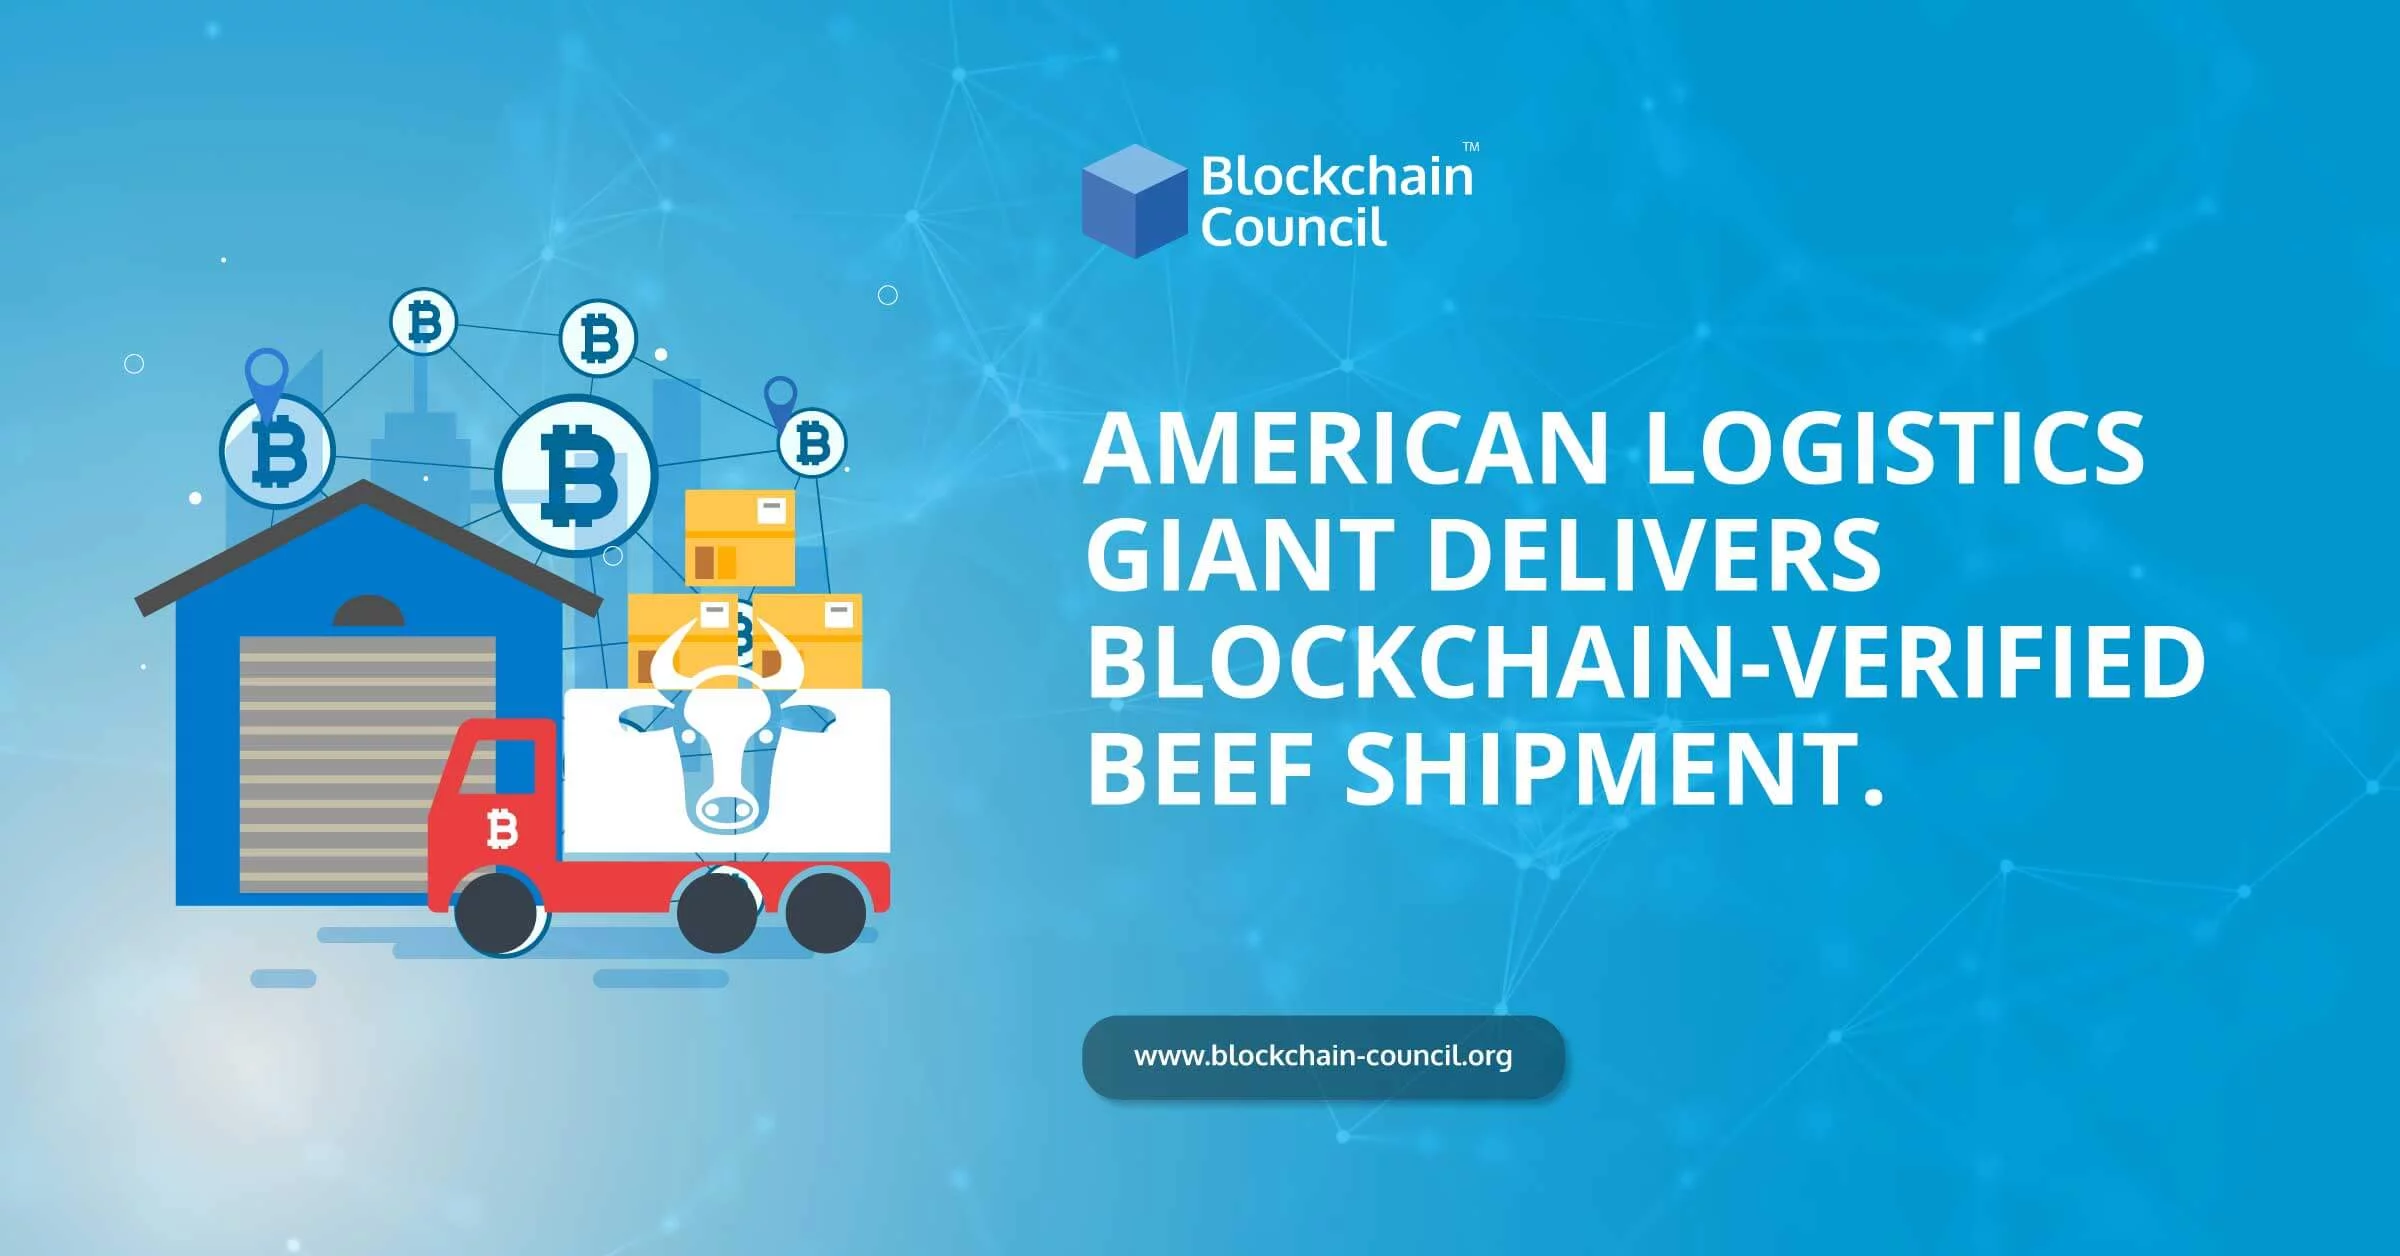 American Logistics Giant Delivers Blockchain-Verified Beef Shipment